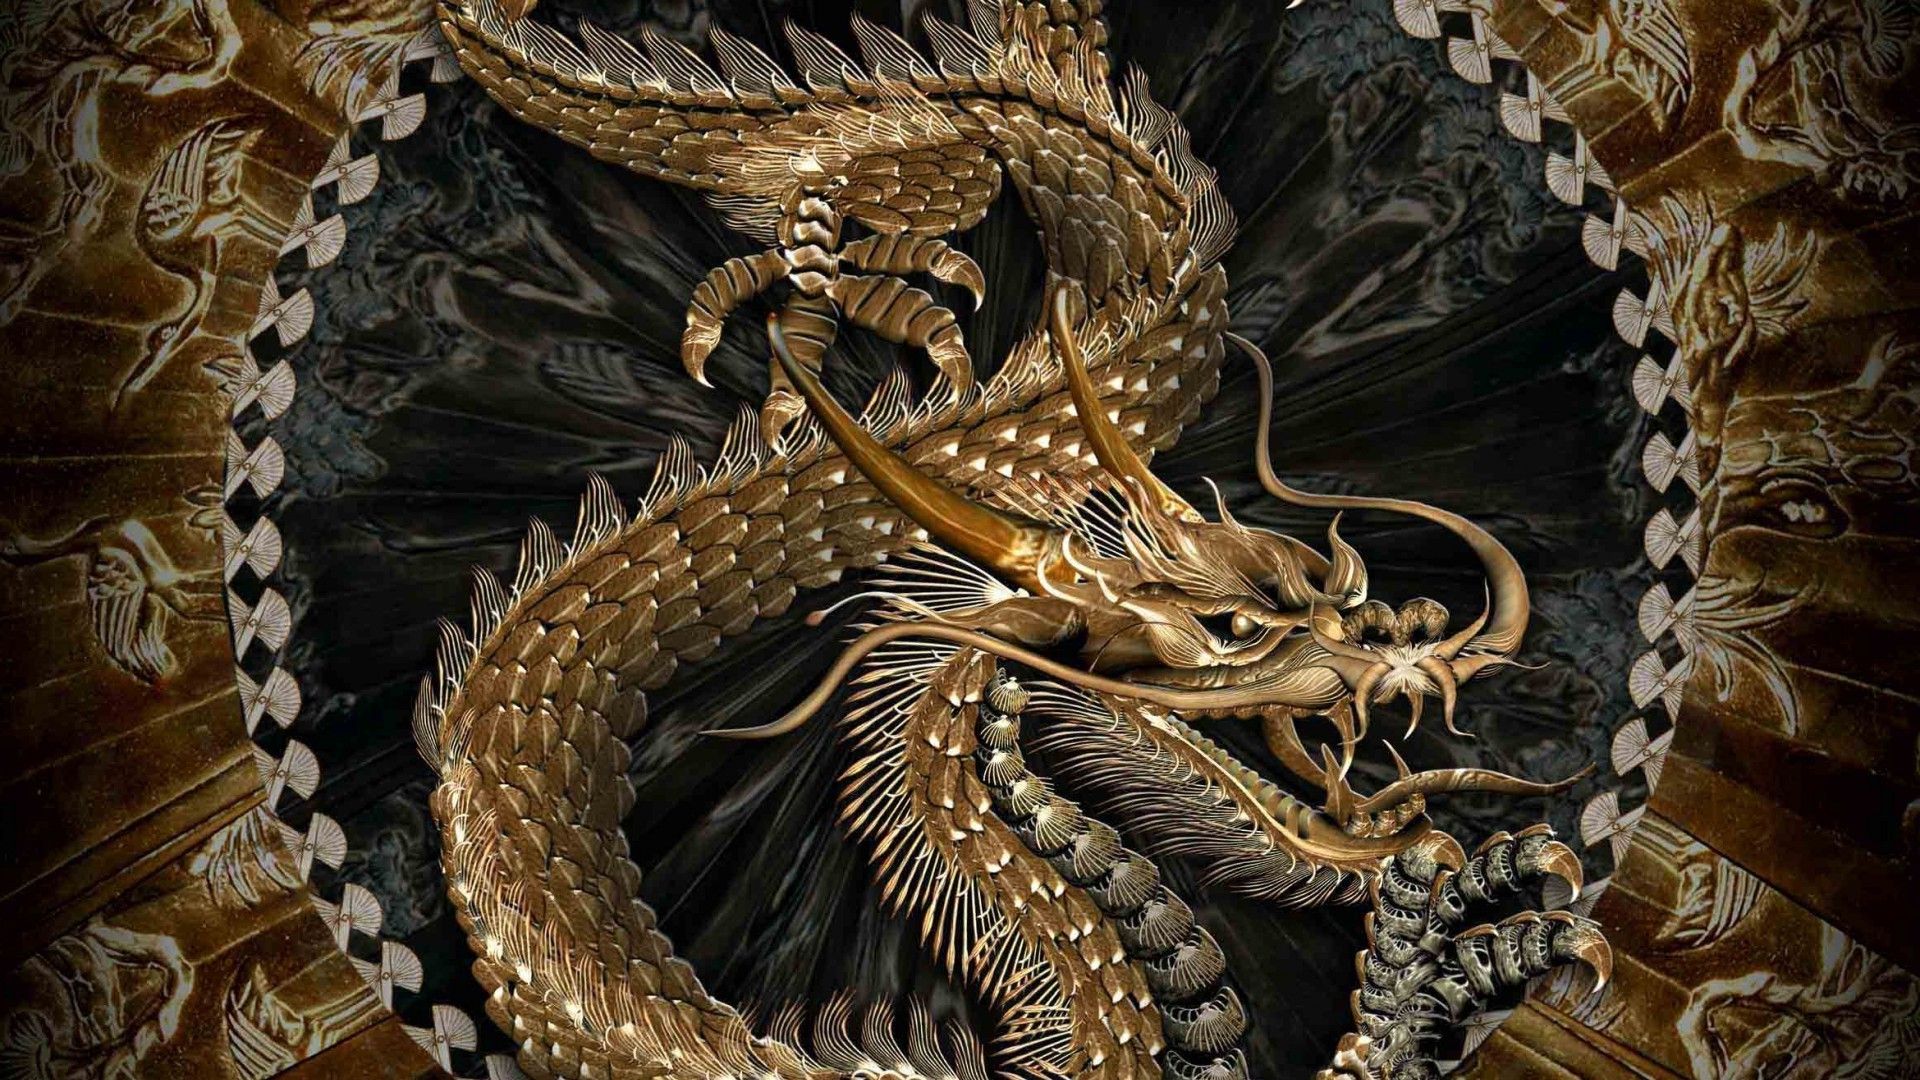 Chinese Dragon Backgrounds